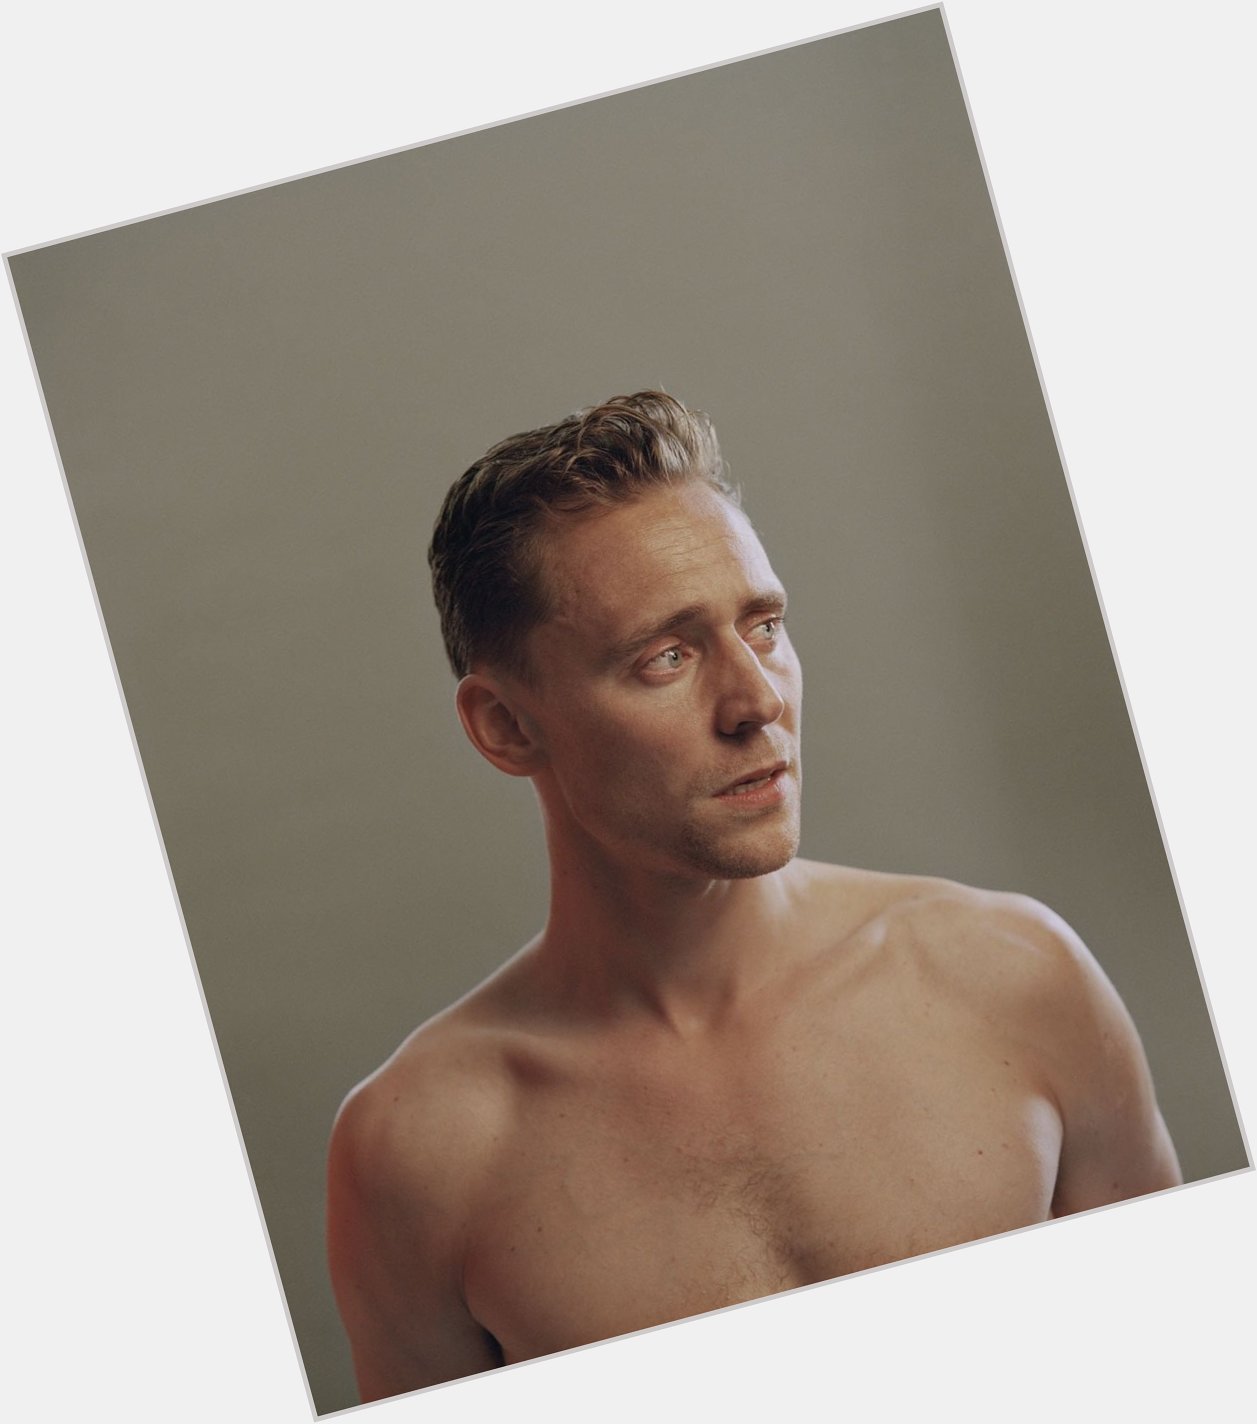 Happy birthday to this underrated sweet inteligent and respectful man, Tom Hiddleston!! 